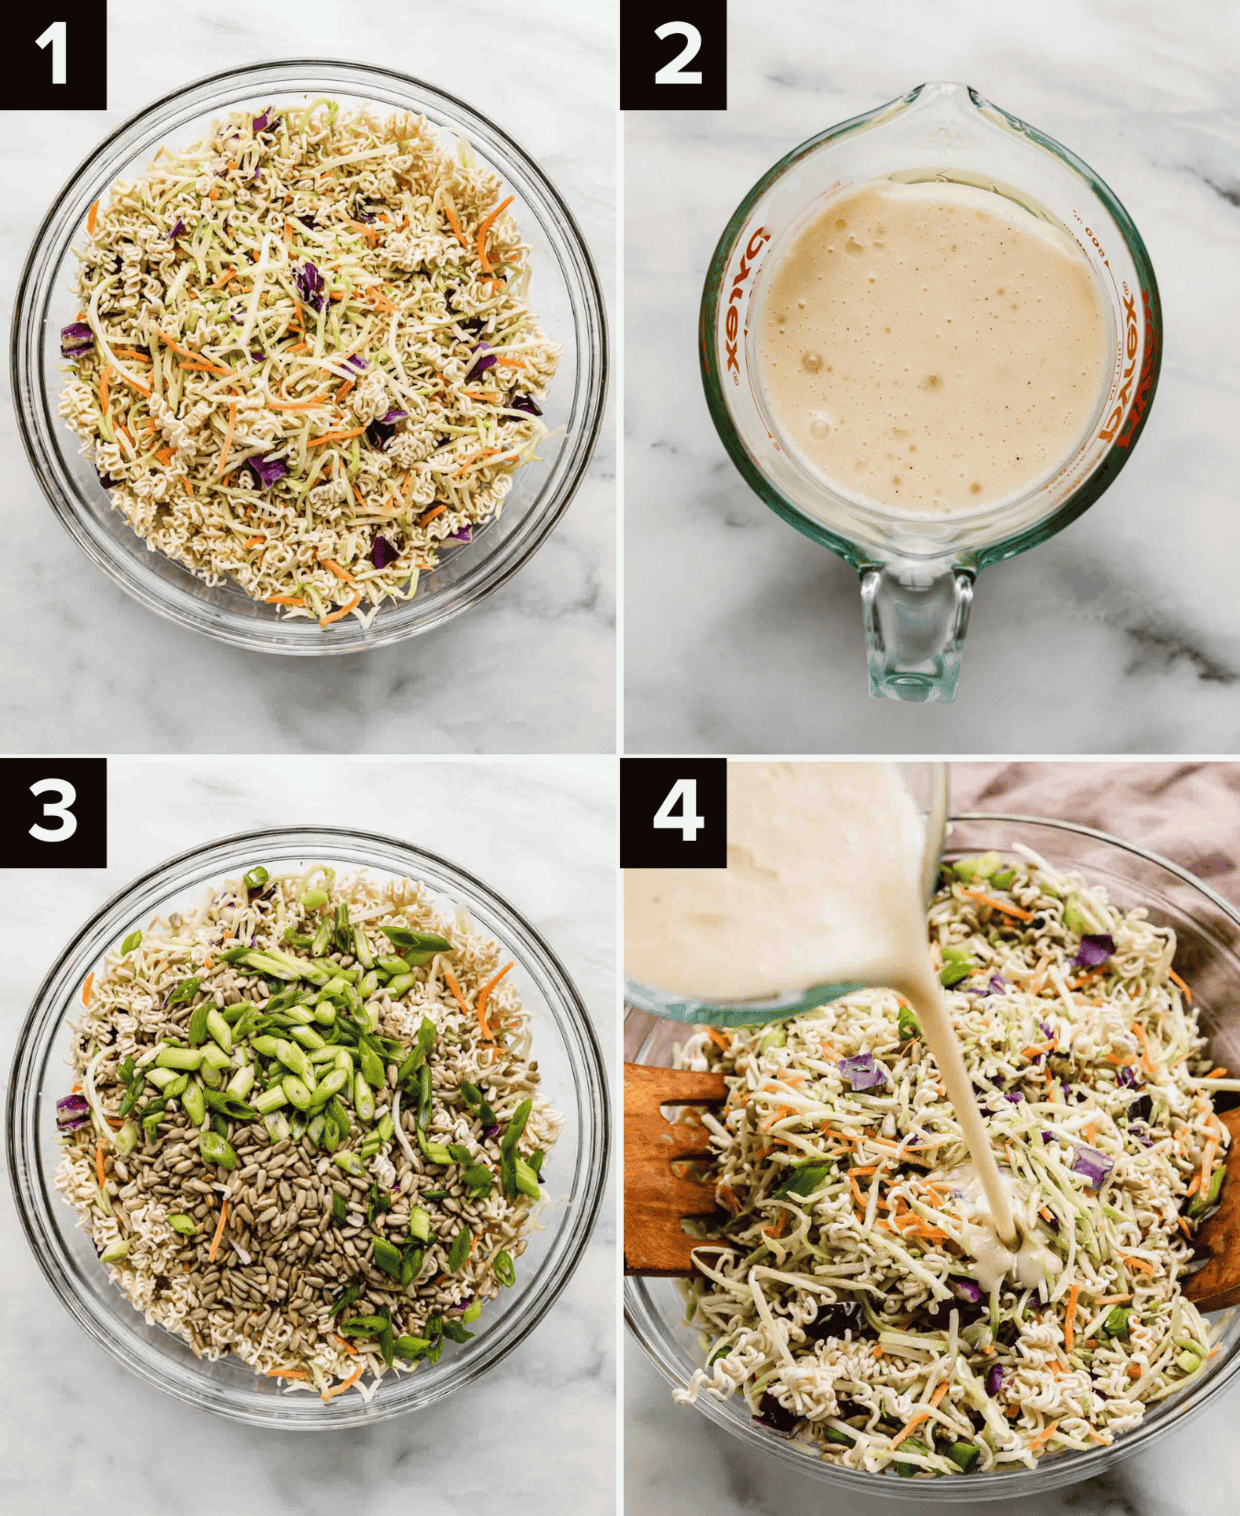 Four images showing how to make Broccoli Slaw, top left is broccoli slaw and ramen noodles in a glass bowl, top right photo is asian style white colored dressing to use over broccoli slaw, bottom left image is green onions over broccoli slaw, bottom right shows dressing being poured overtop Asian Broccoli Slaw.